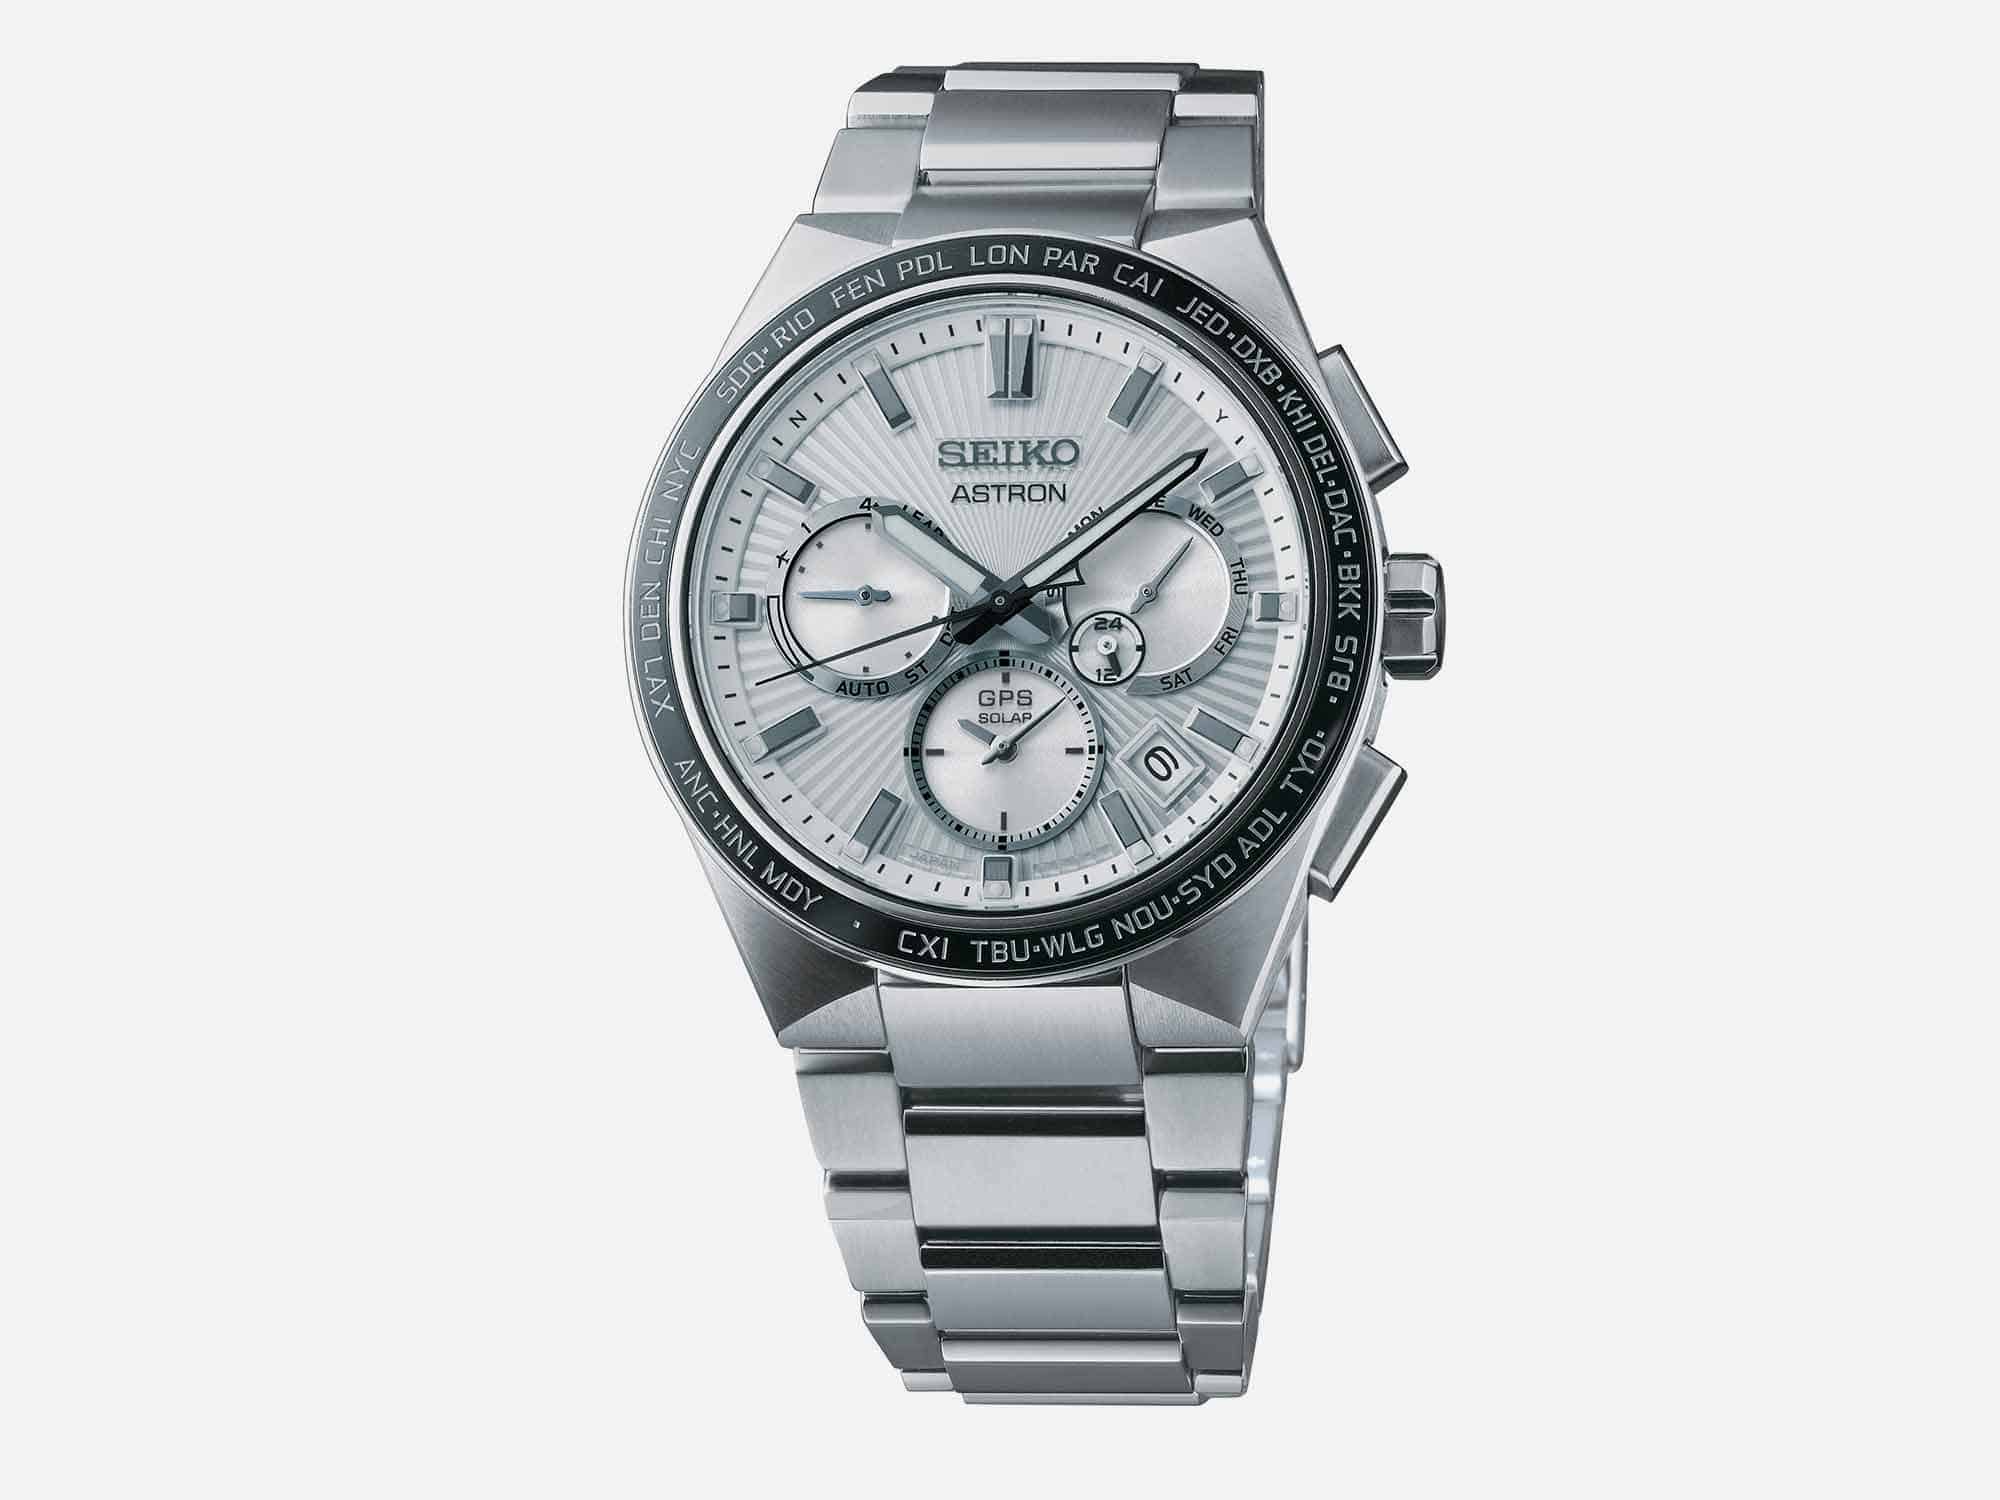 How Smart Do You Really Want a Watch to Be" Seiko’s New Astron Straddles the Smartwatch Line